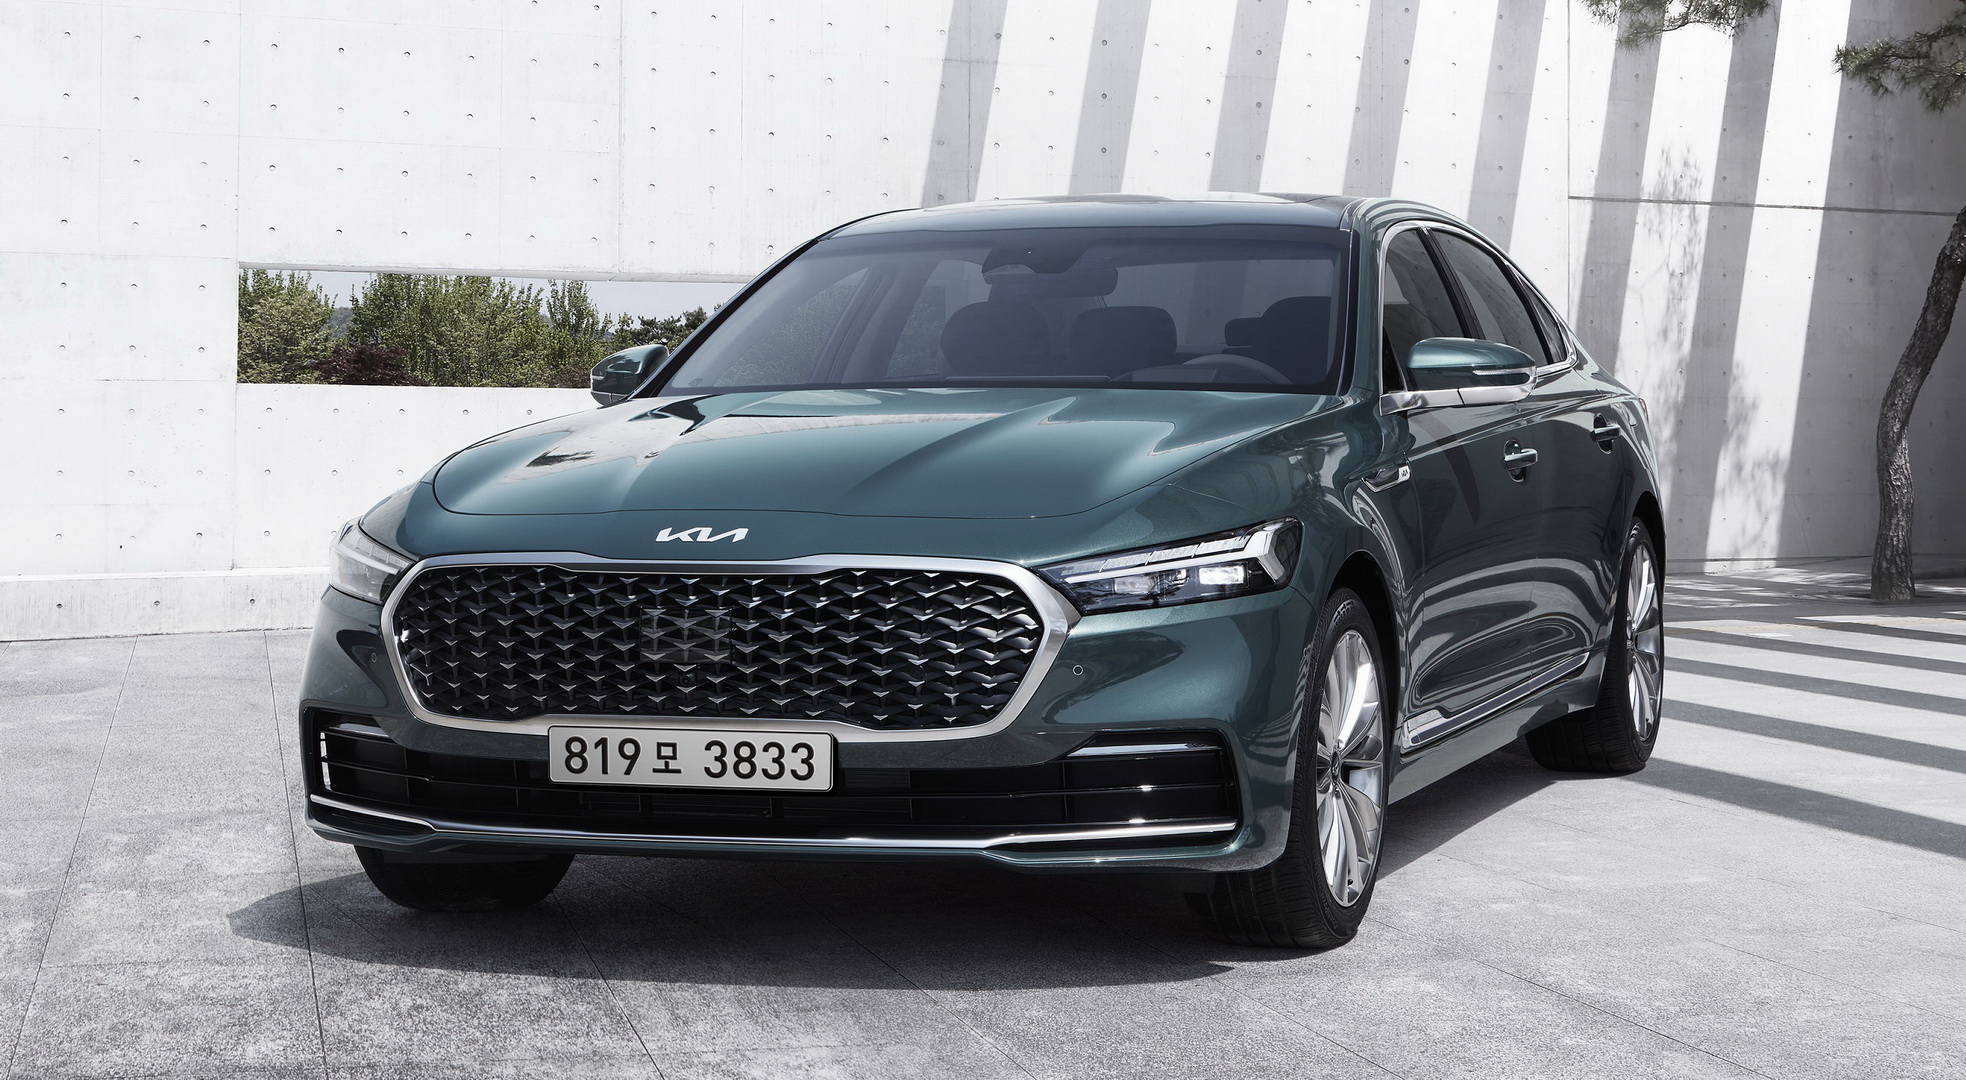 Updated 2022 Kia K900/K9 Unveiled With Sharper Looks, New 19-Inch Alloys -  autoevolution